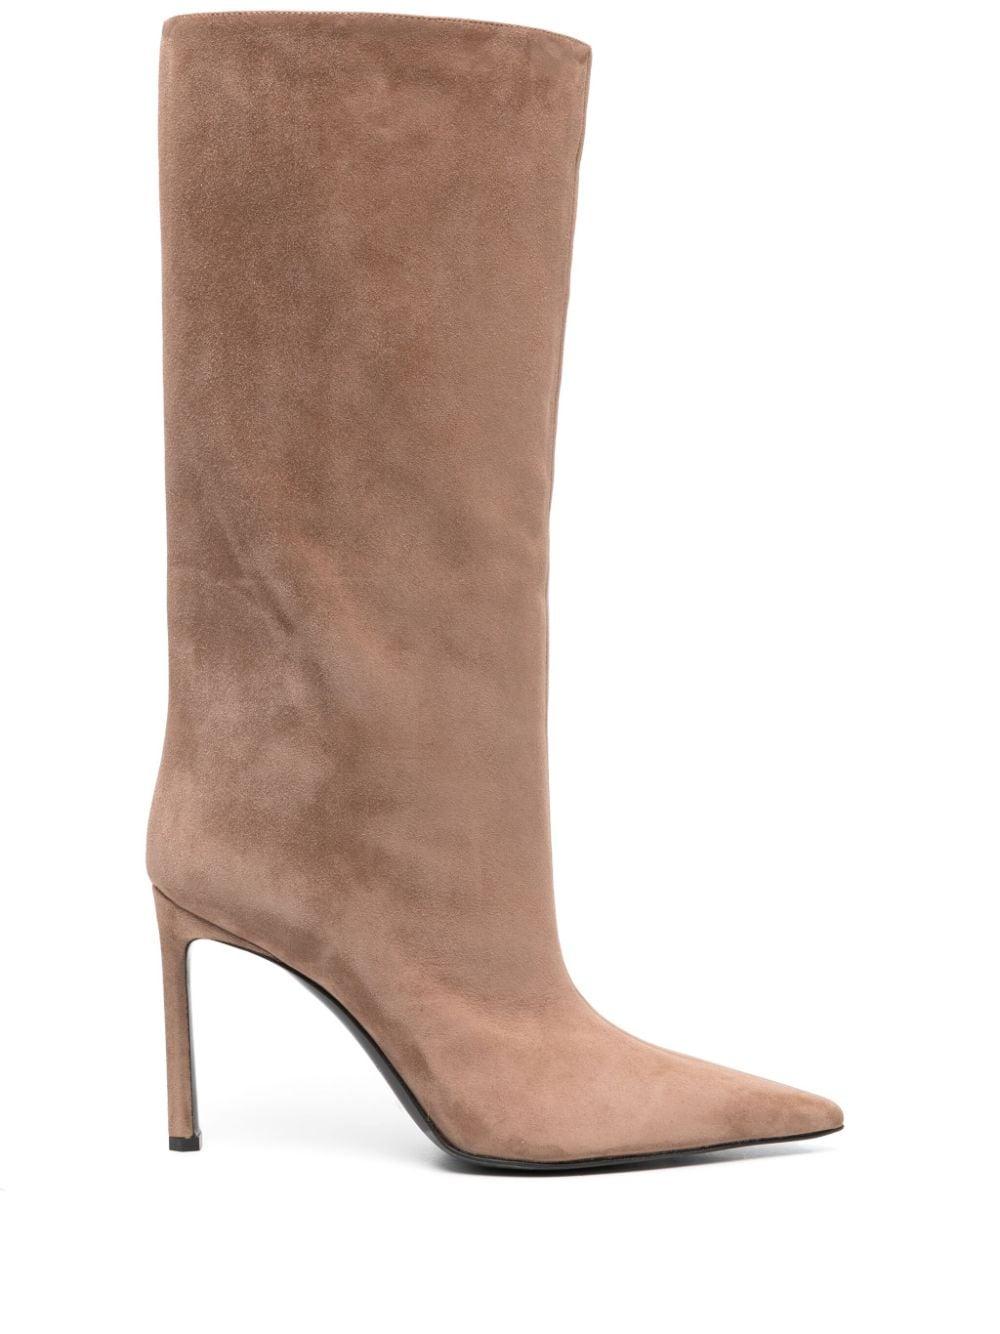 Sergio Rossi Liya 90mm Suede Boots in Brown | Lyst